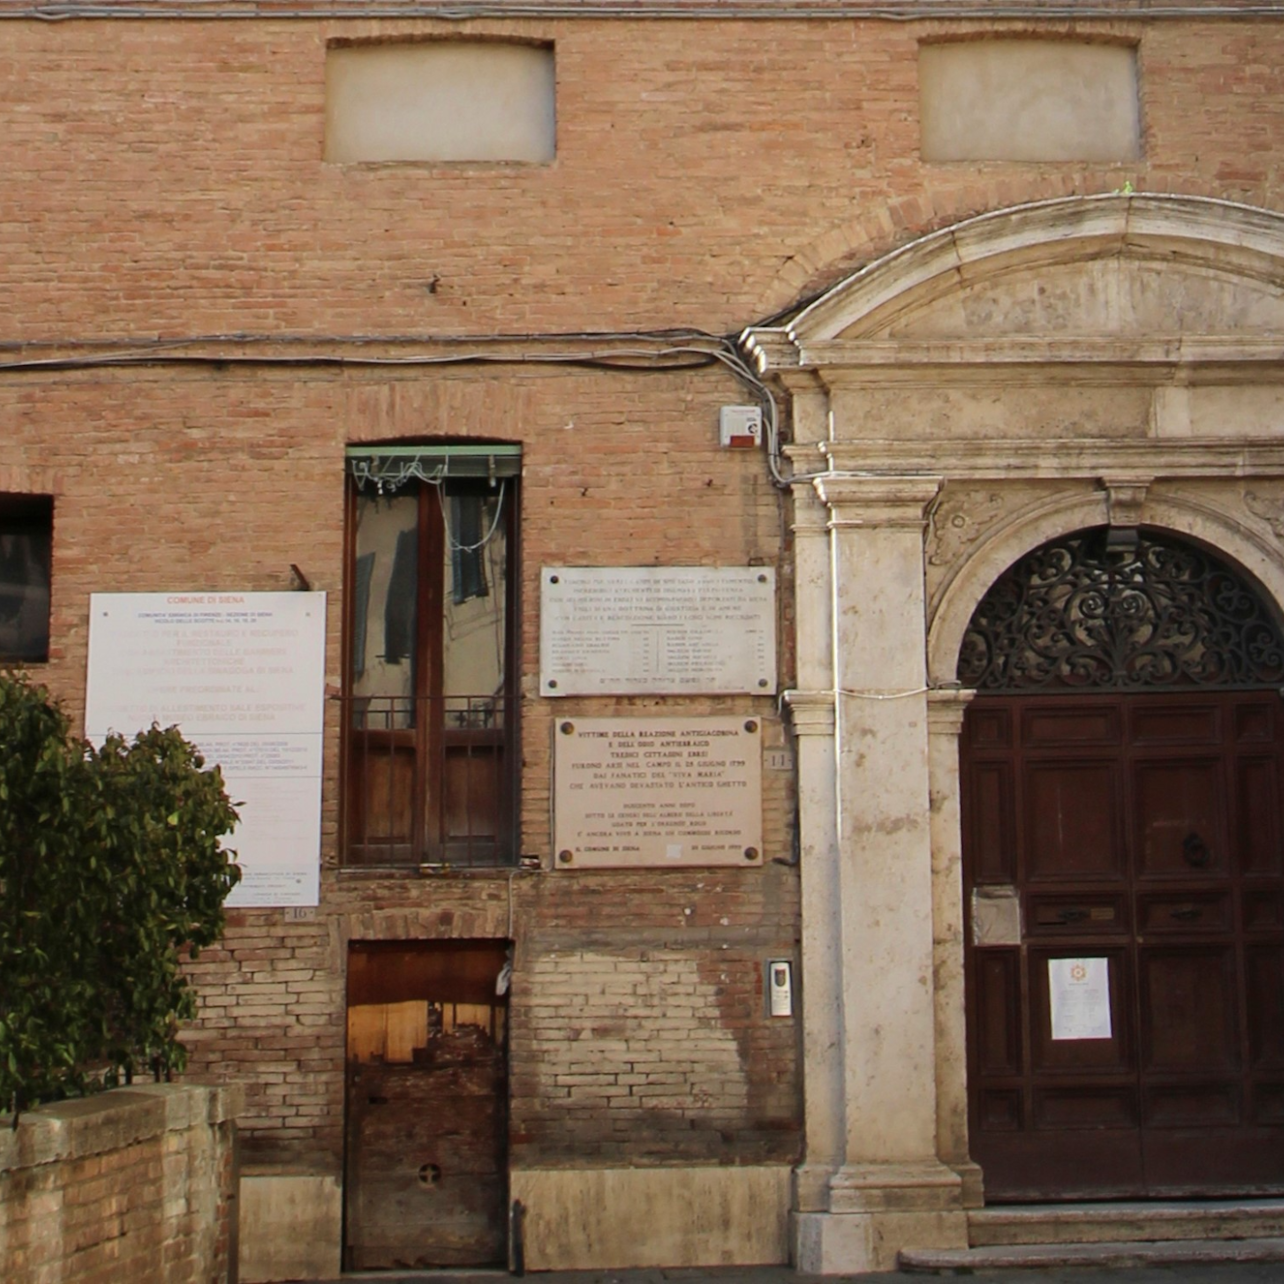 The Synagogue of Siena